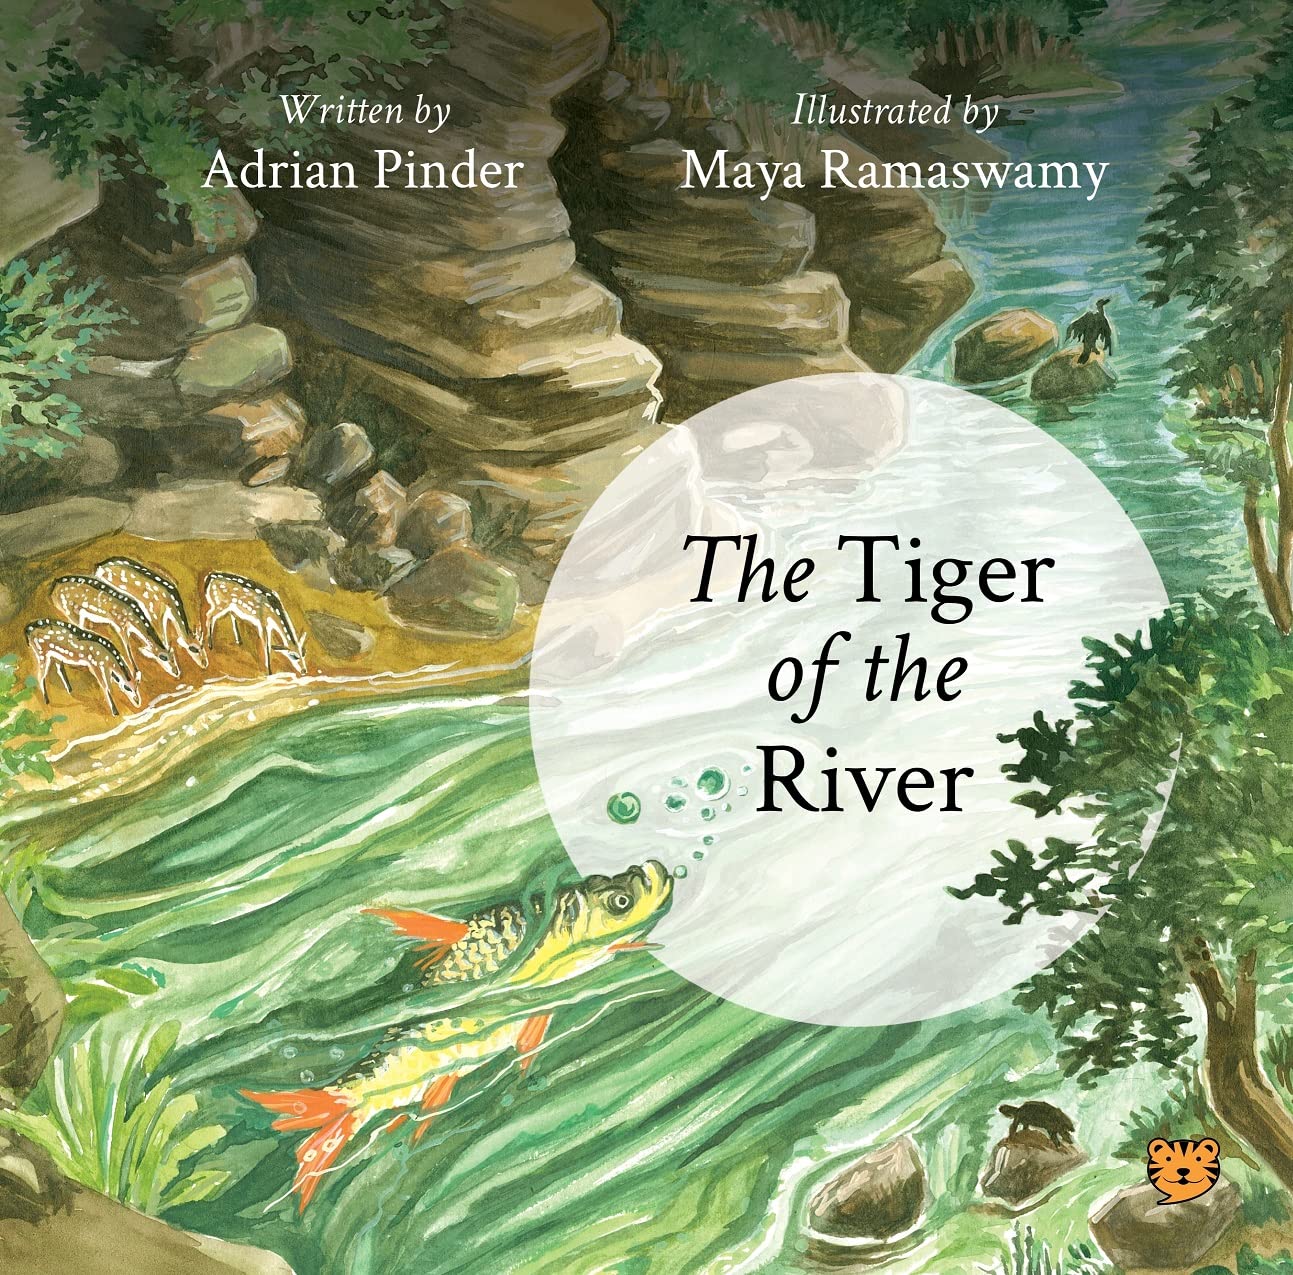 You are currently viewing The Tiger of the River by Adrian Pinder, illustrated by Maya Ramaswamy 